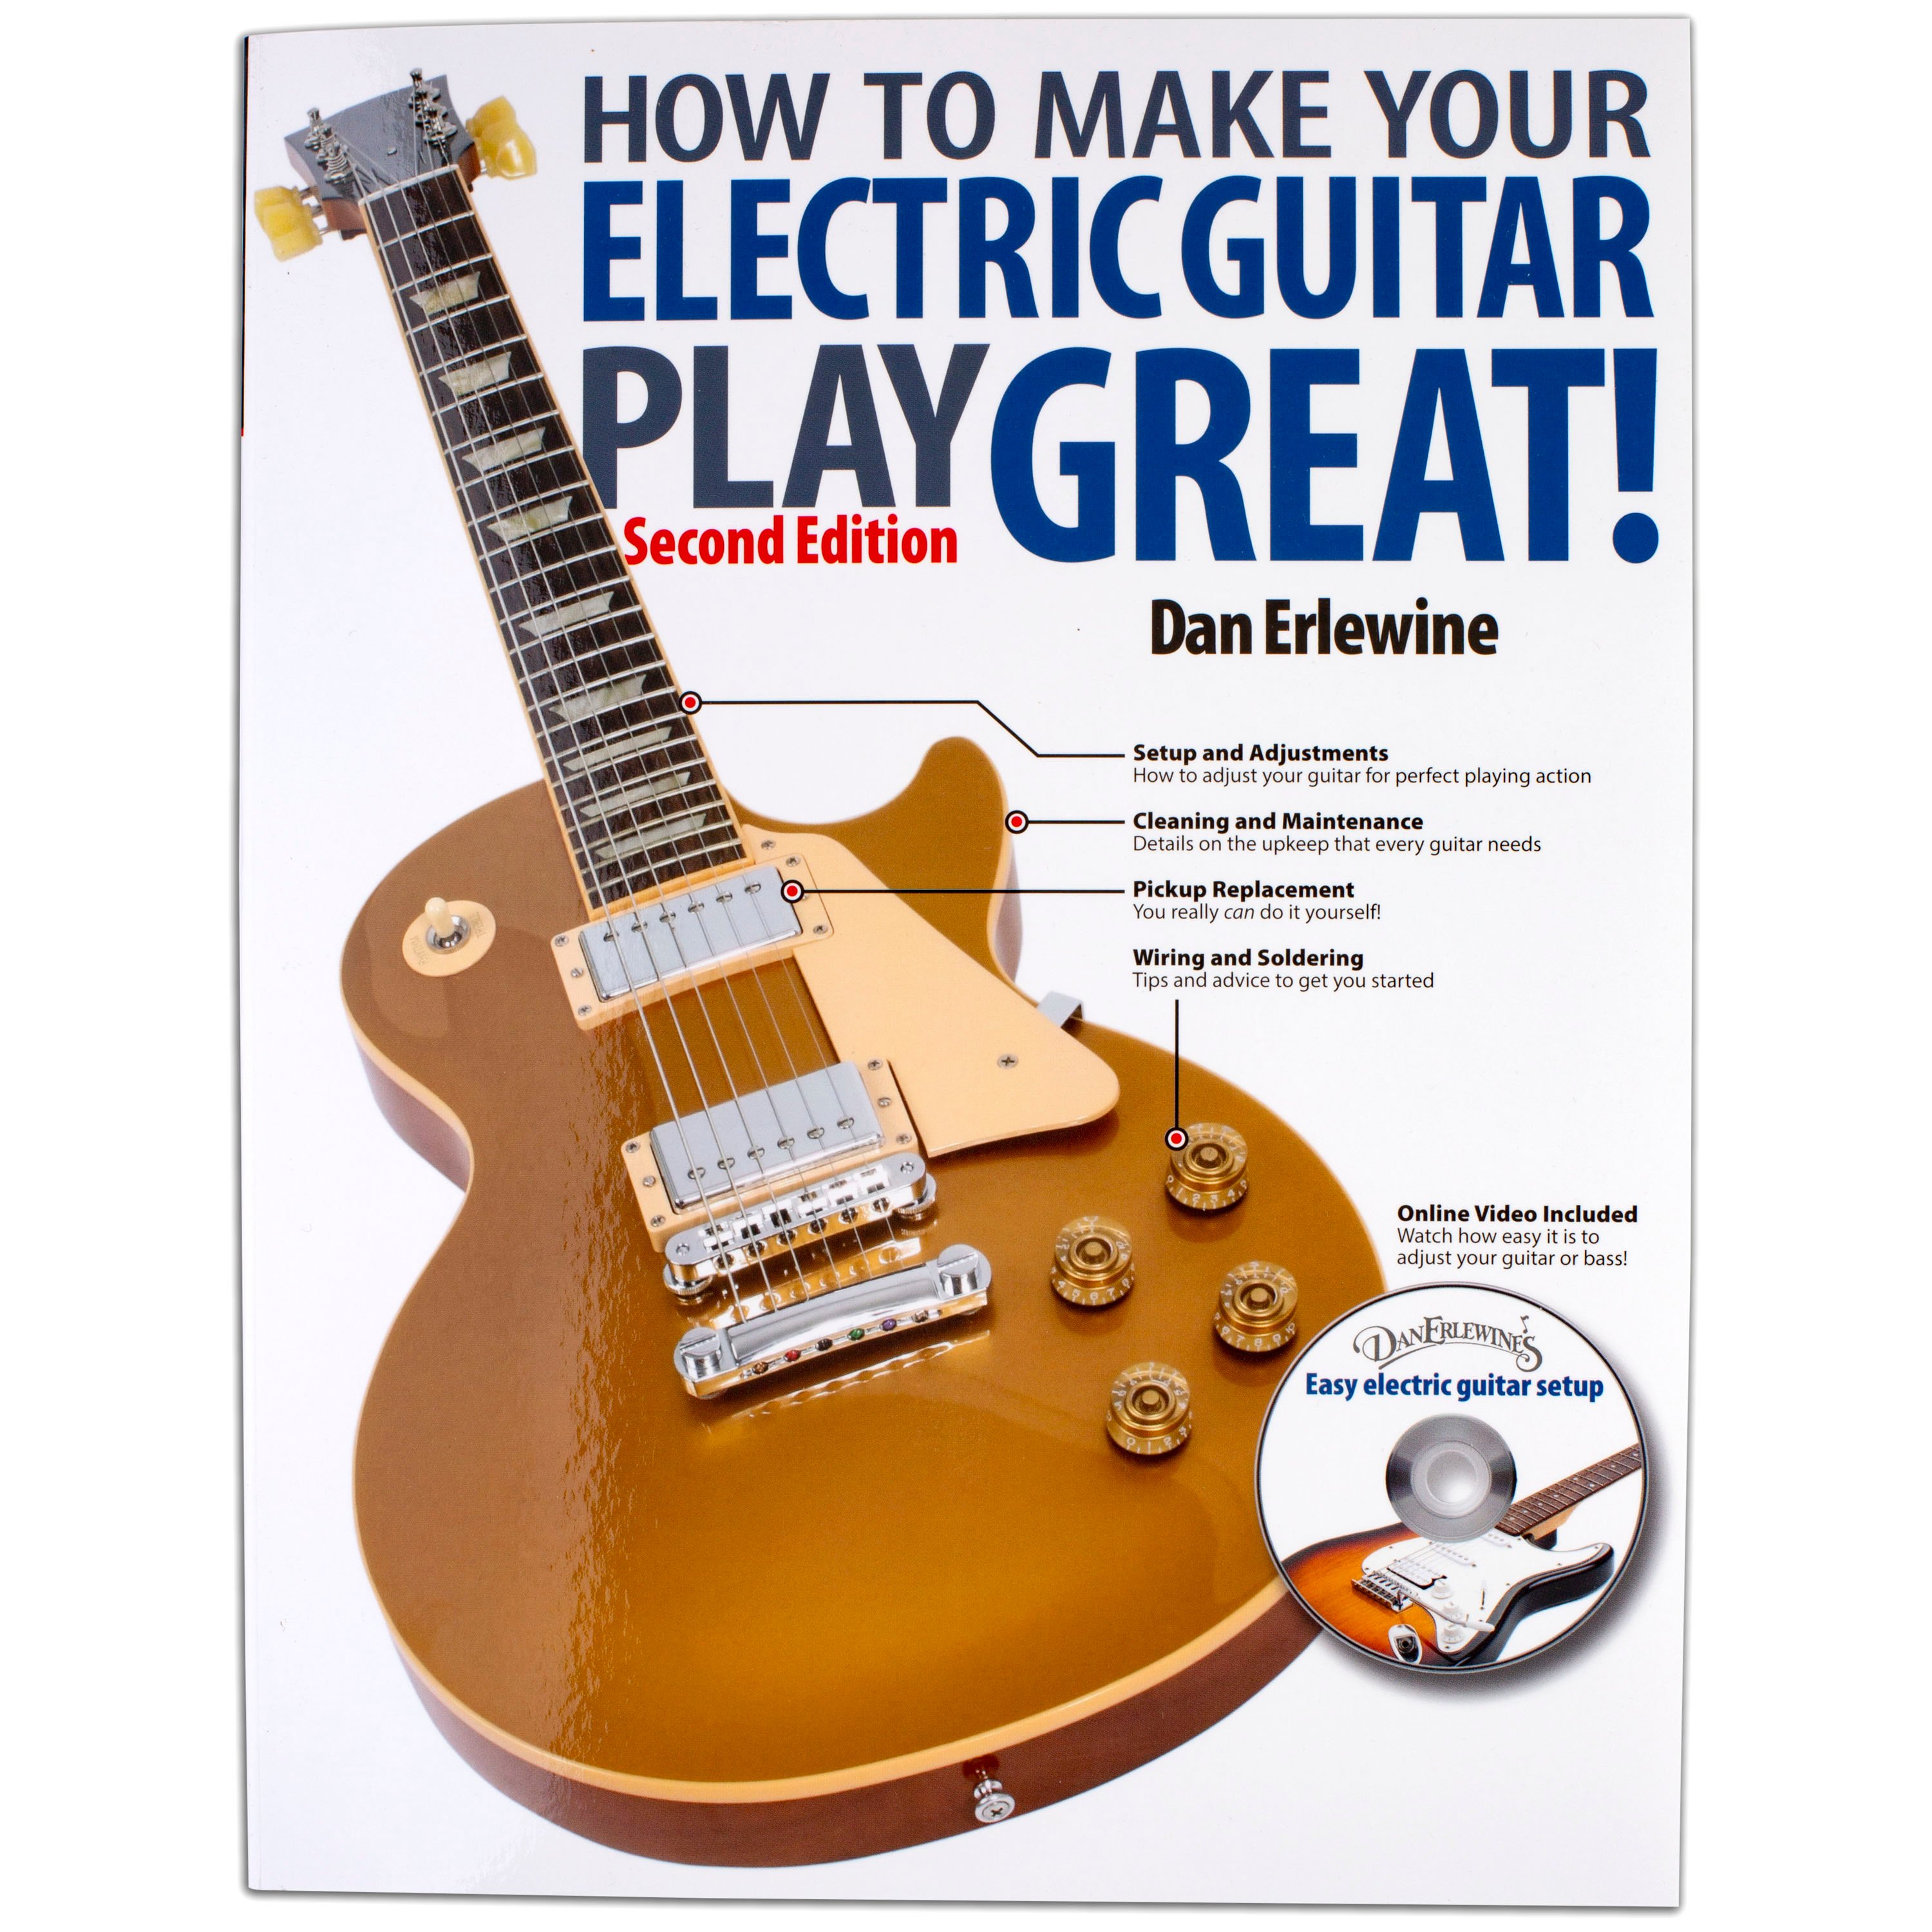 How To Make Your Electric Guitar Play Great!